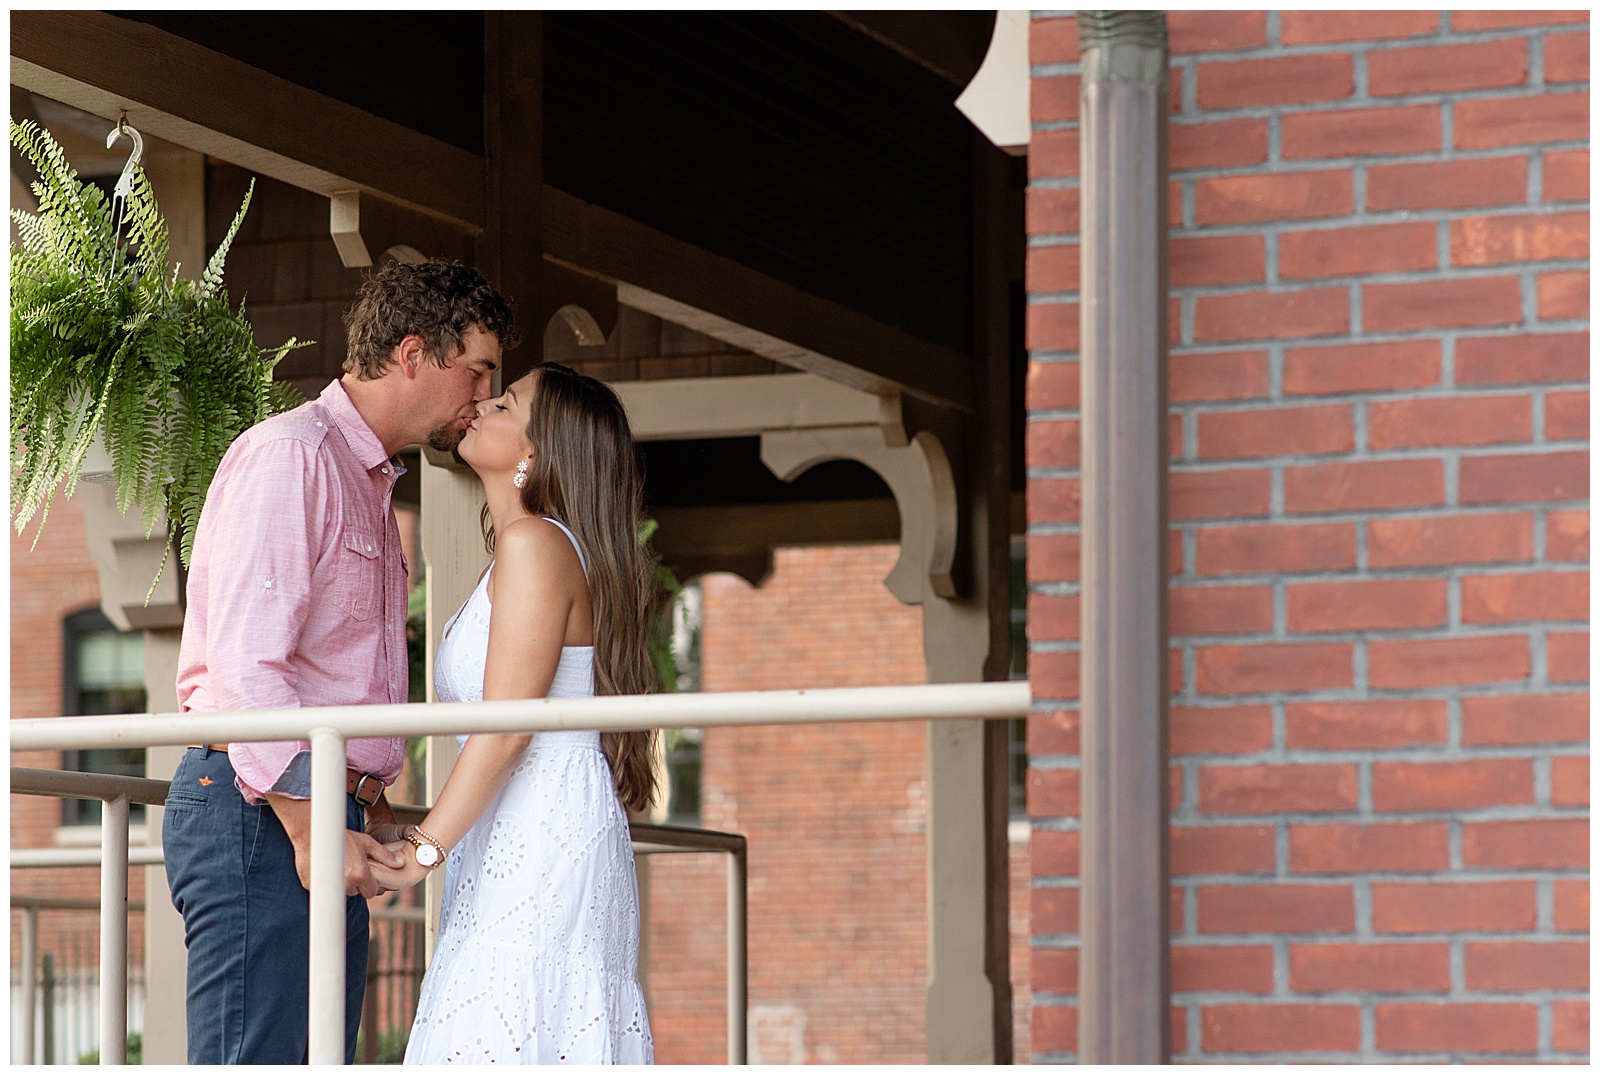 engaged couple kissing on porch of brick building in downtown lititz pennsylvania